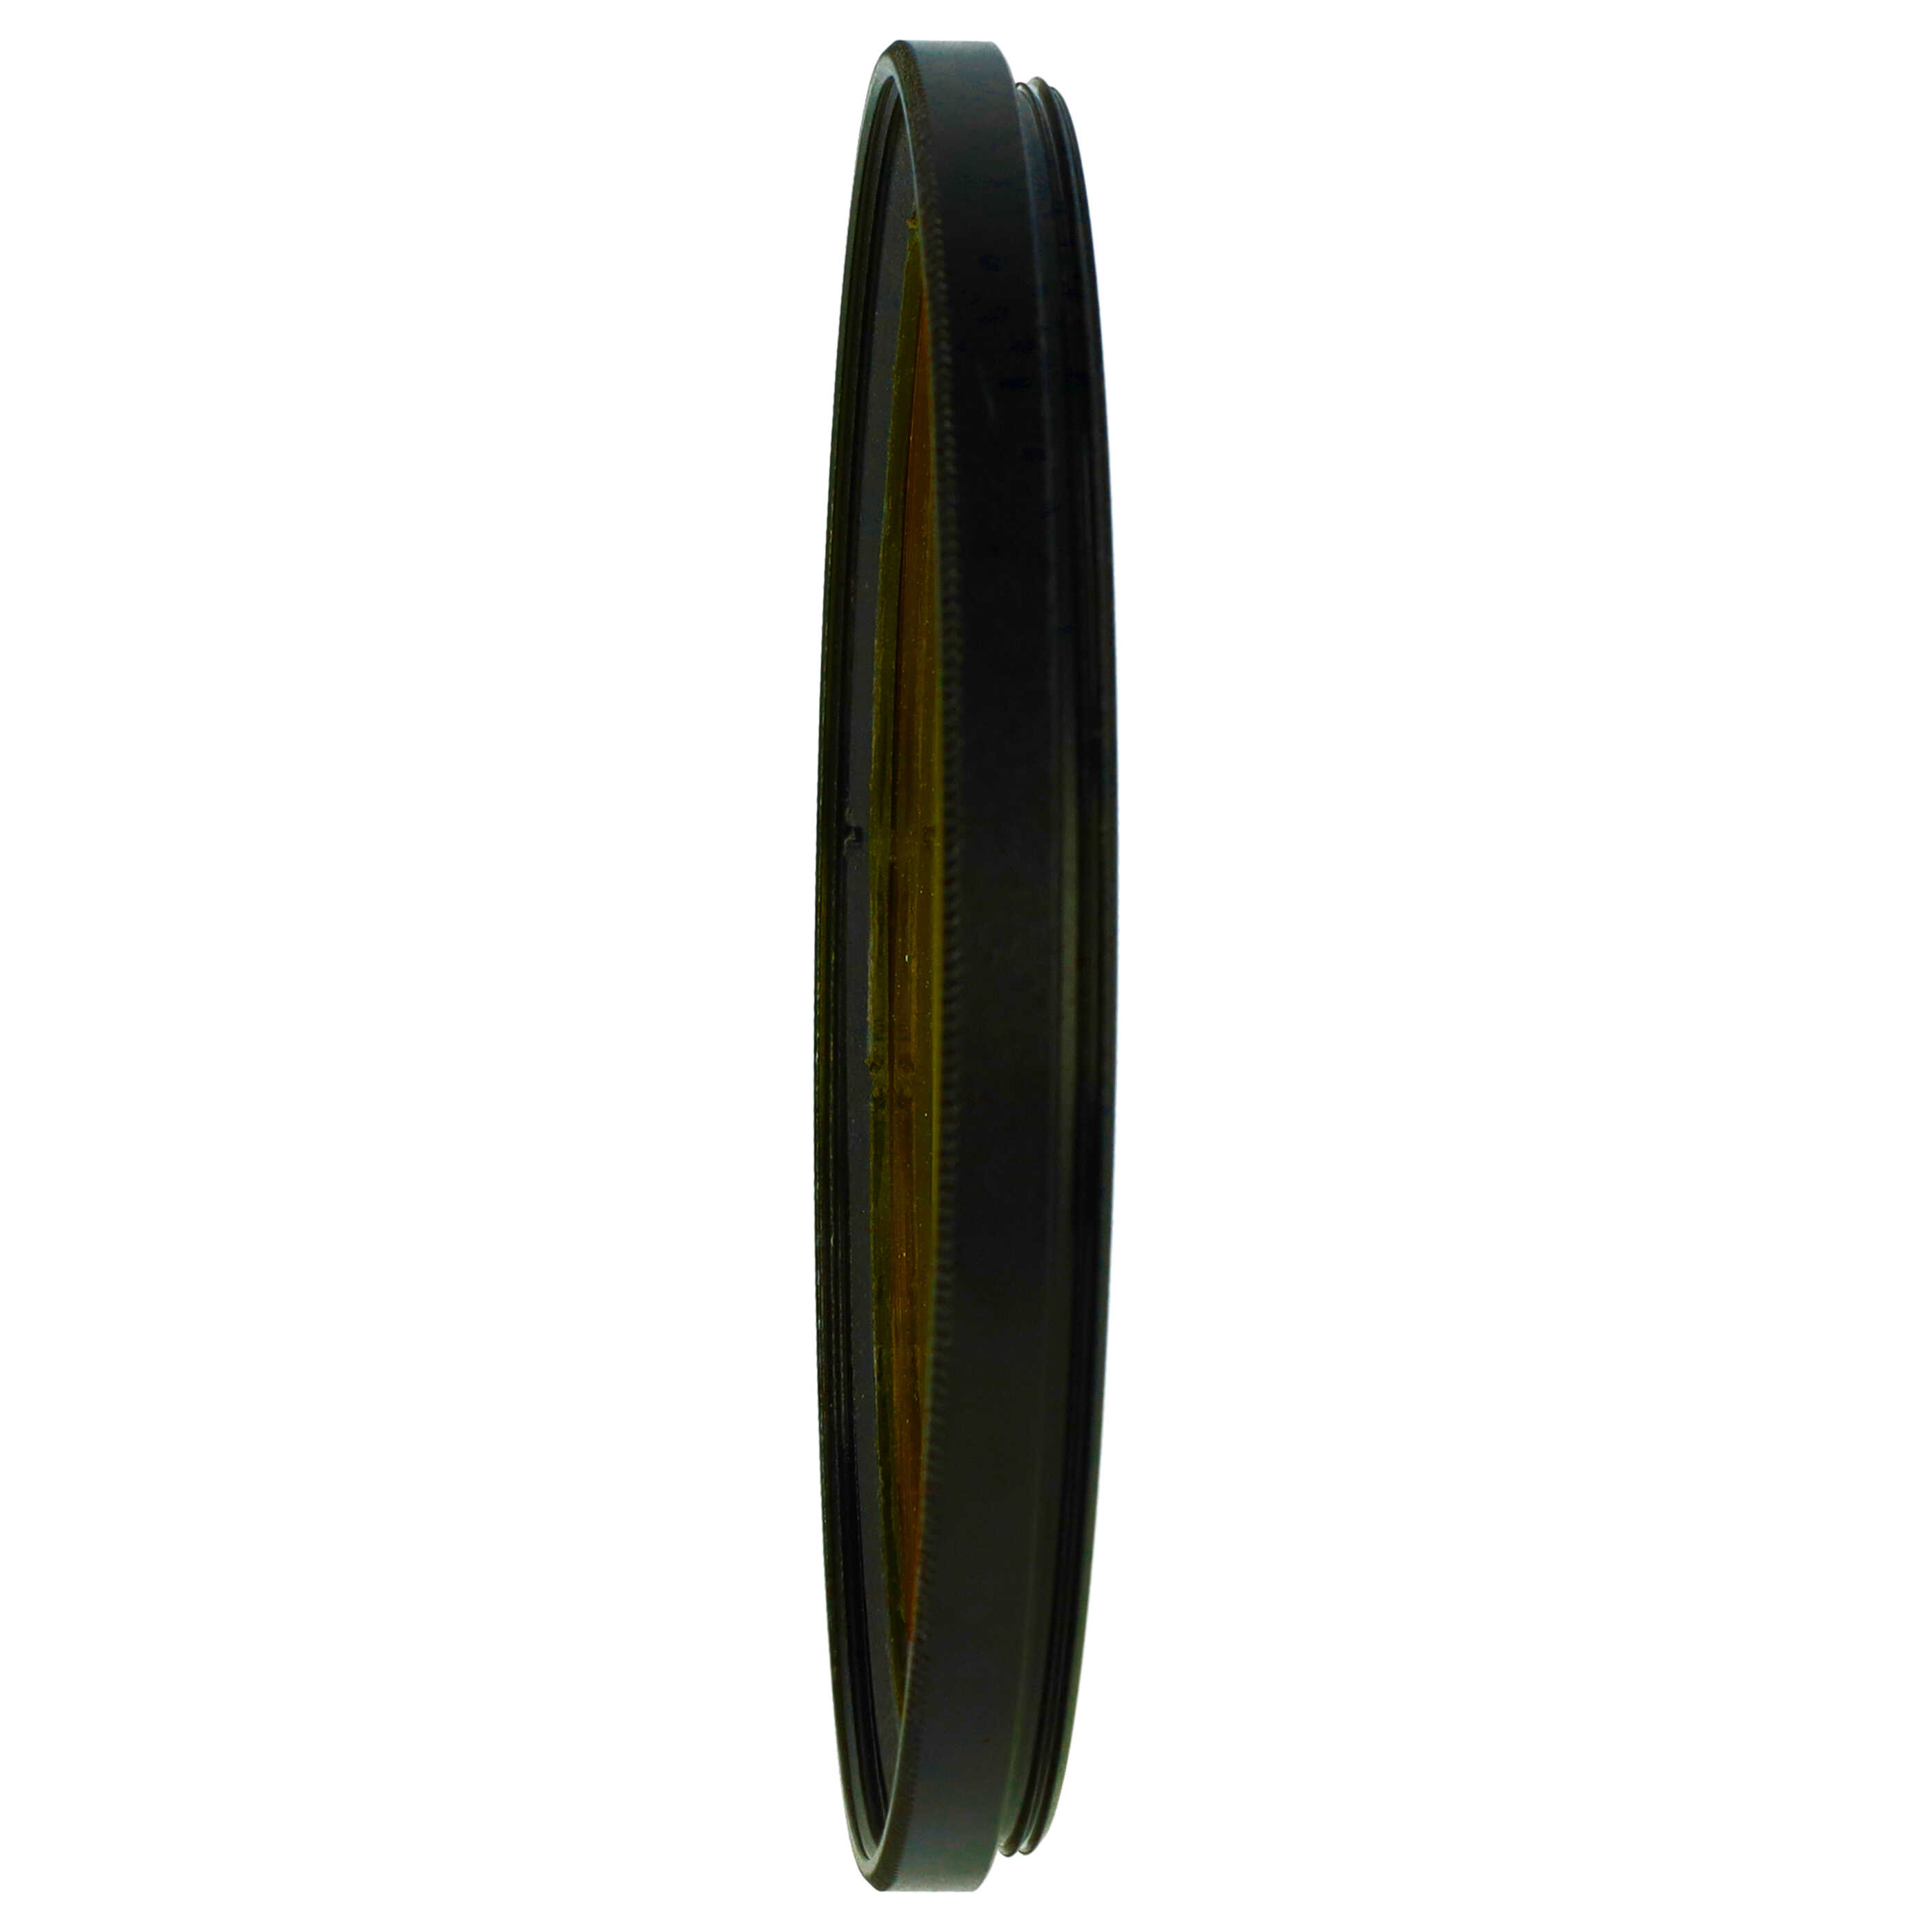 Coloured Filter, Yellow suitable for Camera Lenses with 67 mm Filter Thread - Yellow Filter